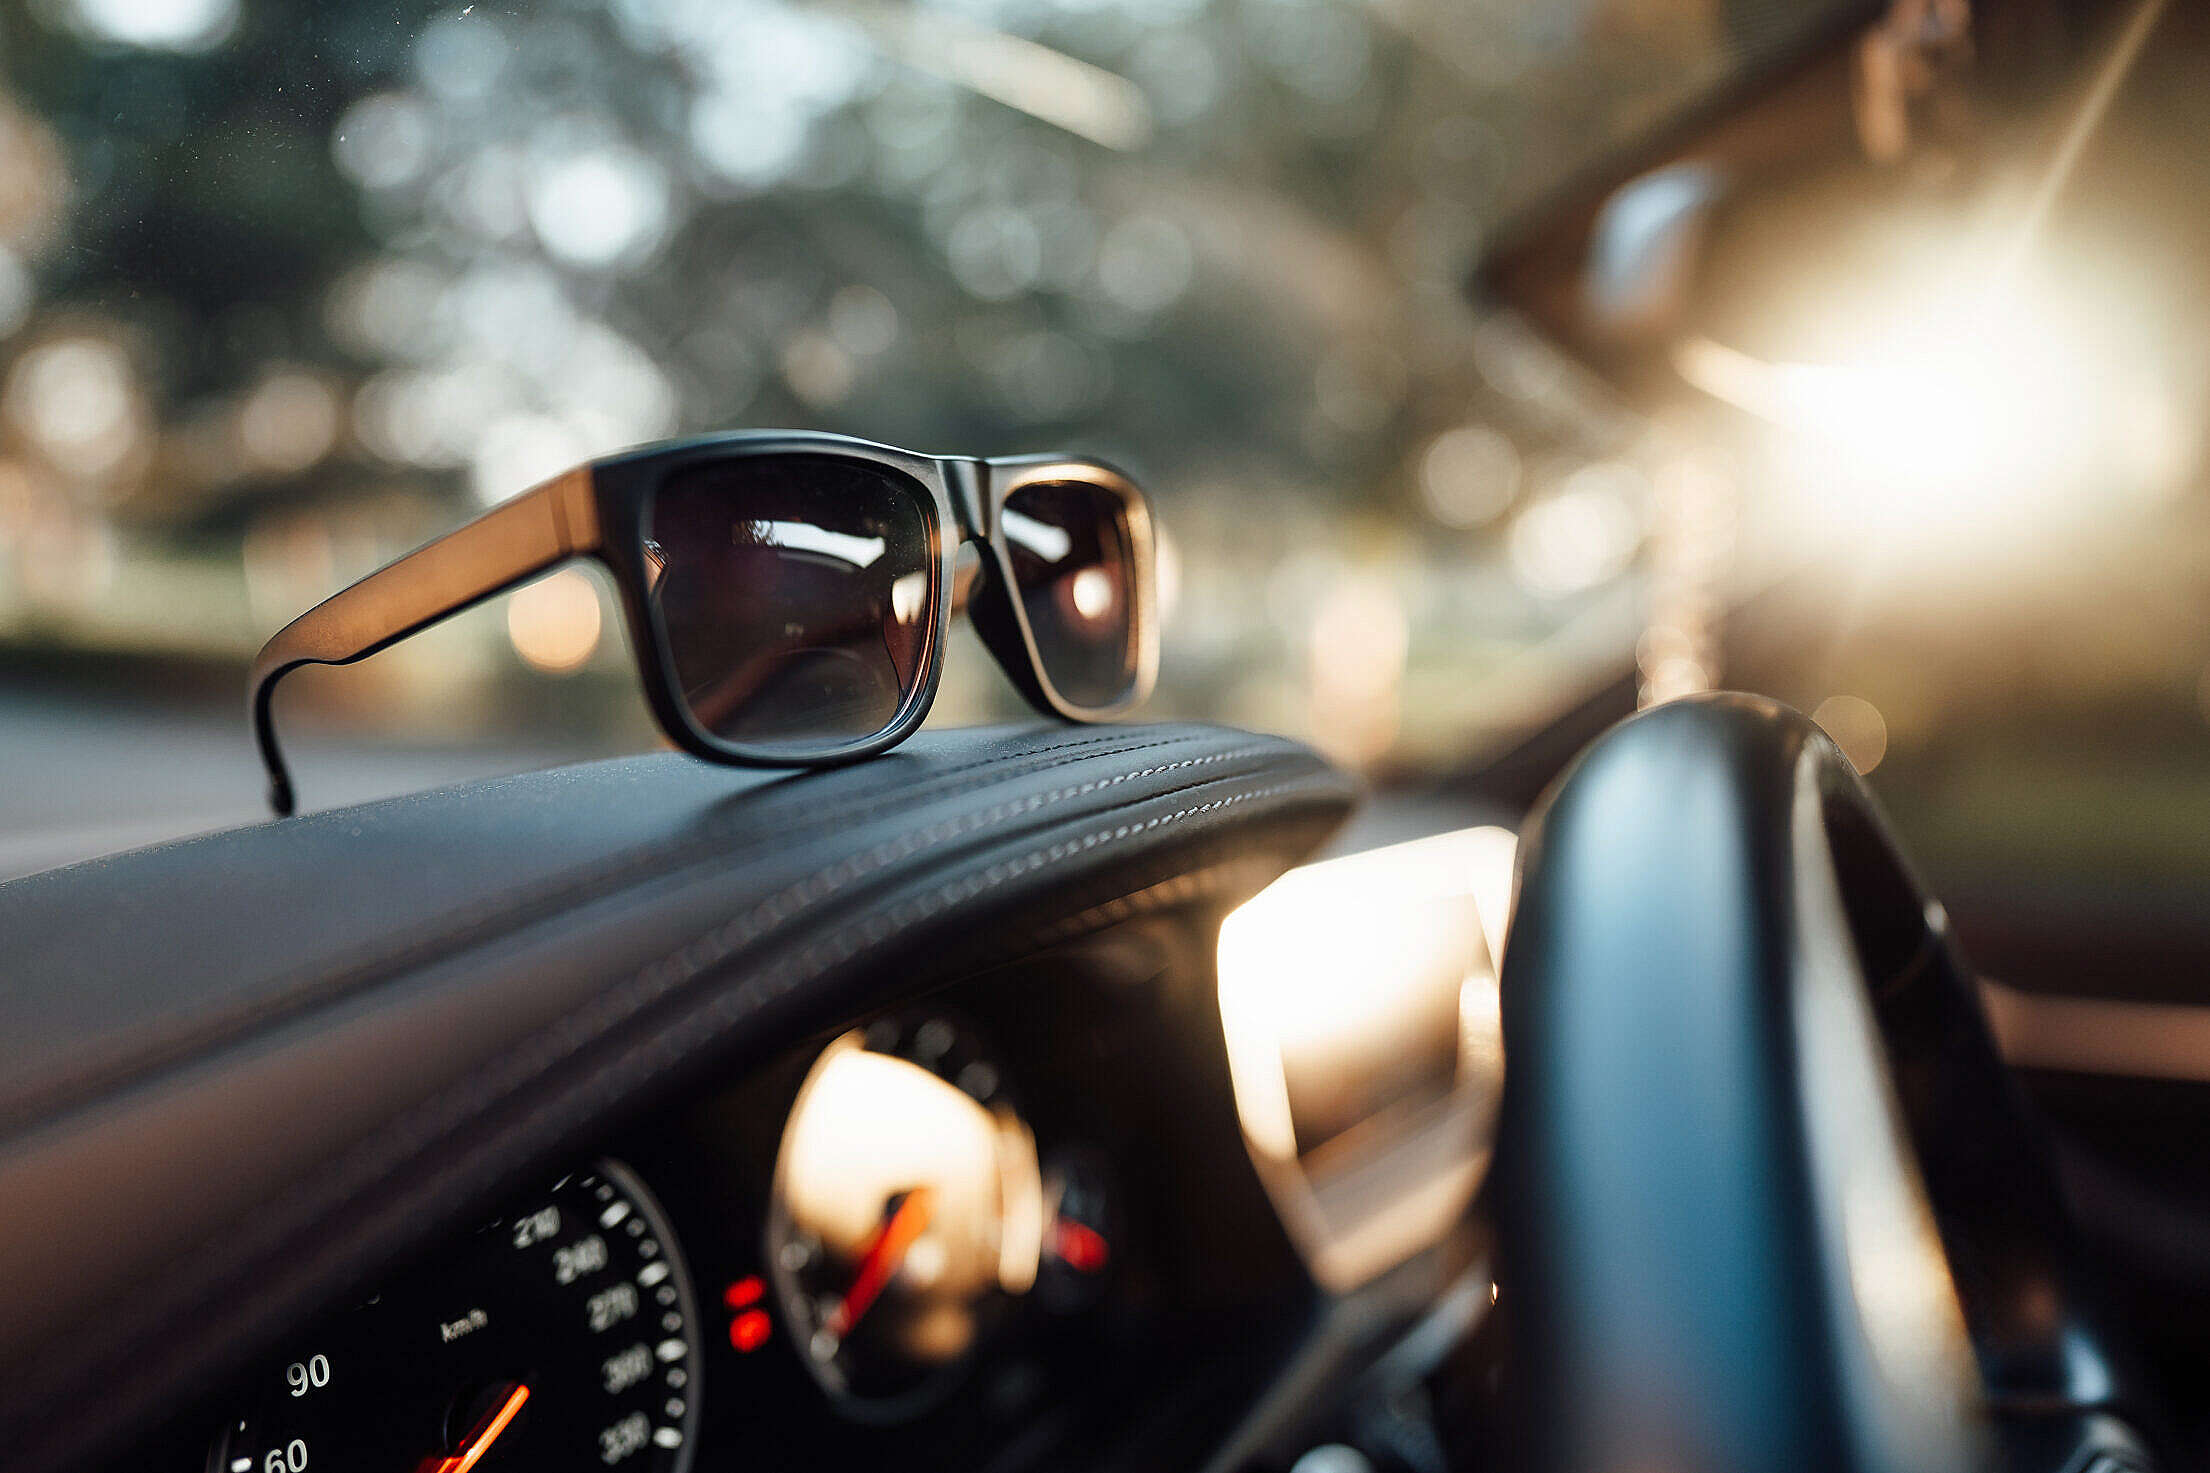 Sunglasses on The Dashboard Free Stock Photo